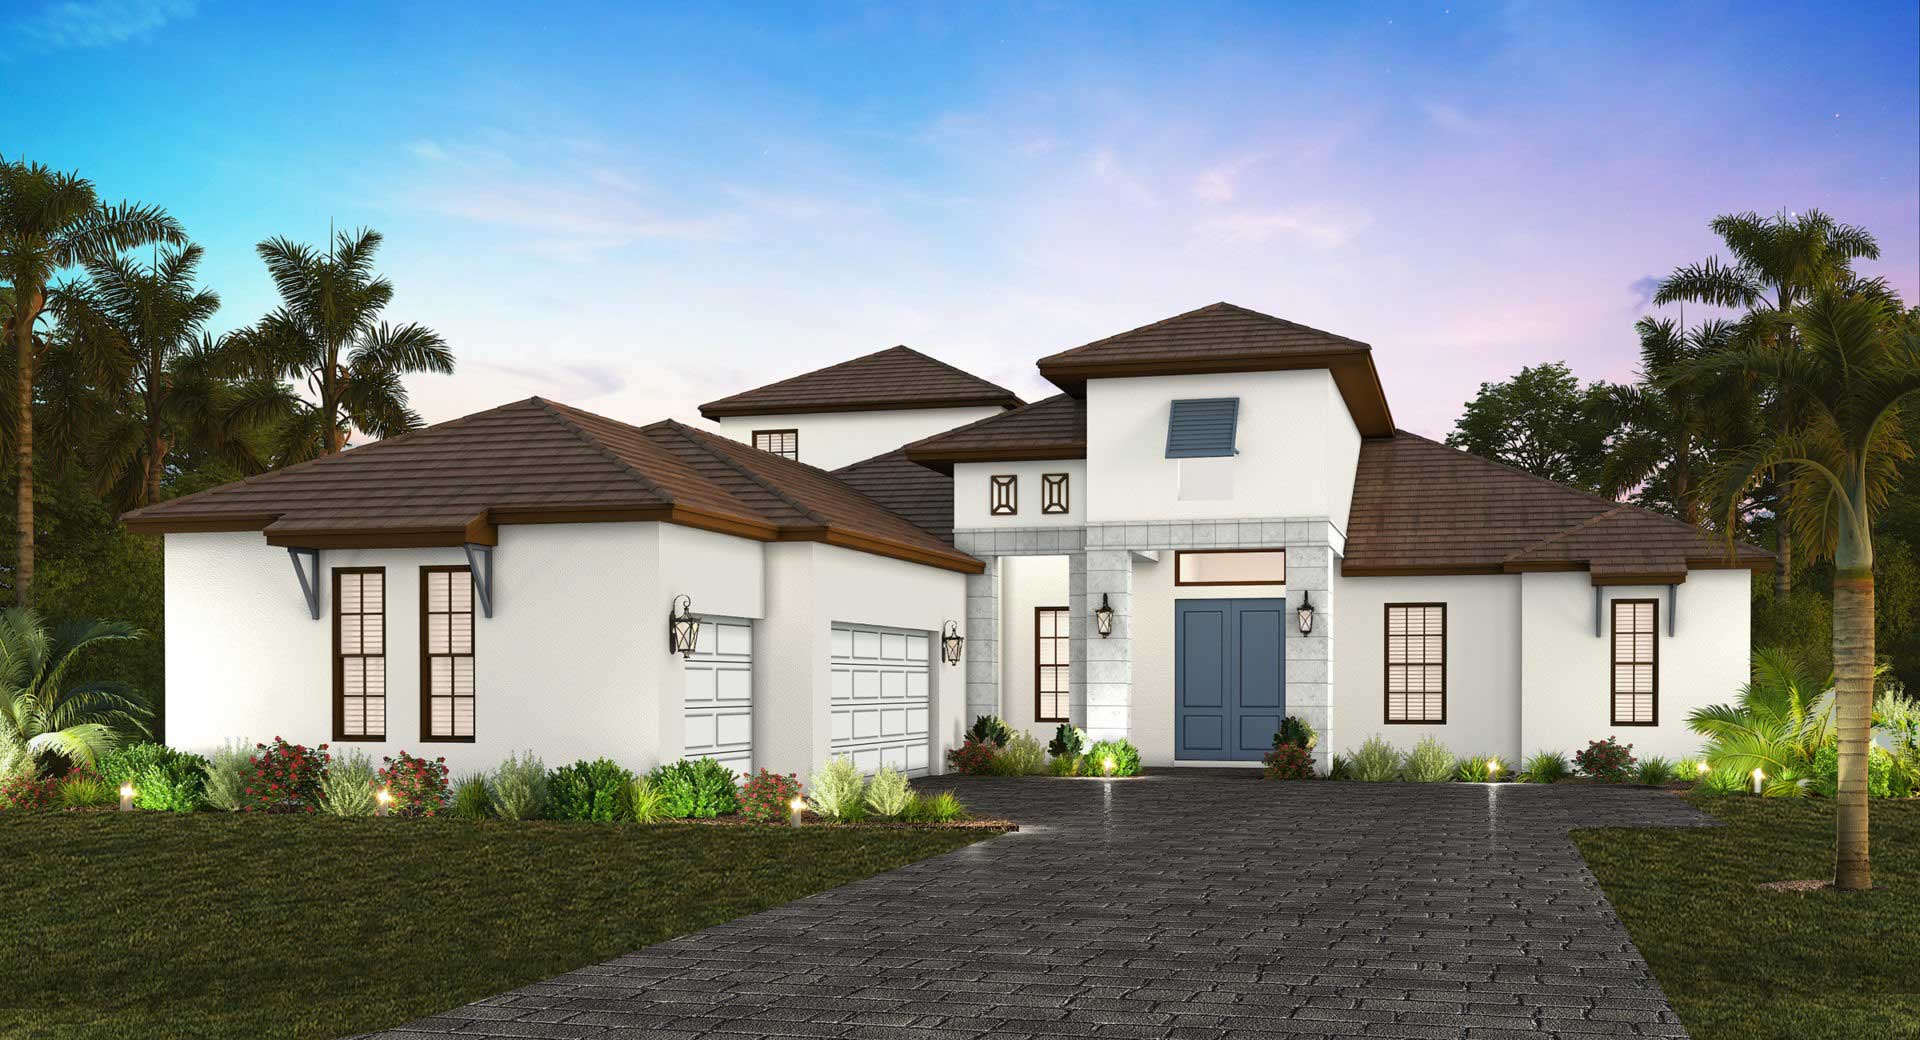 The Pacific Grove is one of the newest floorplans in the St. Lucia neighborhood